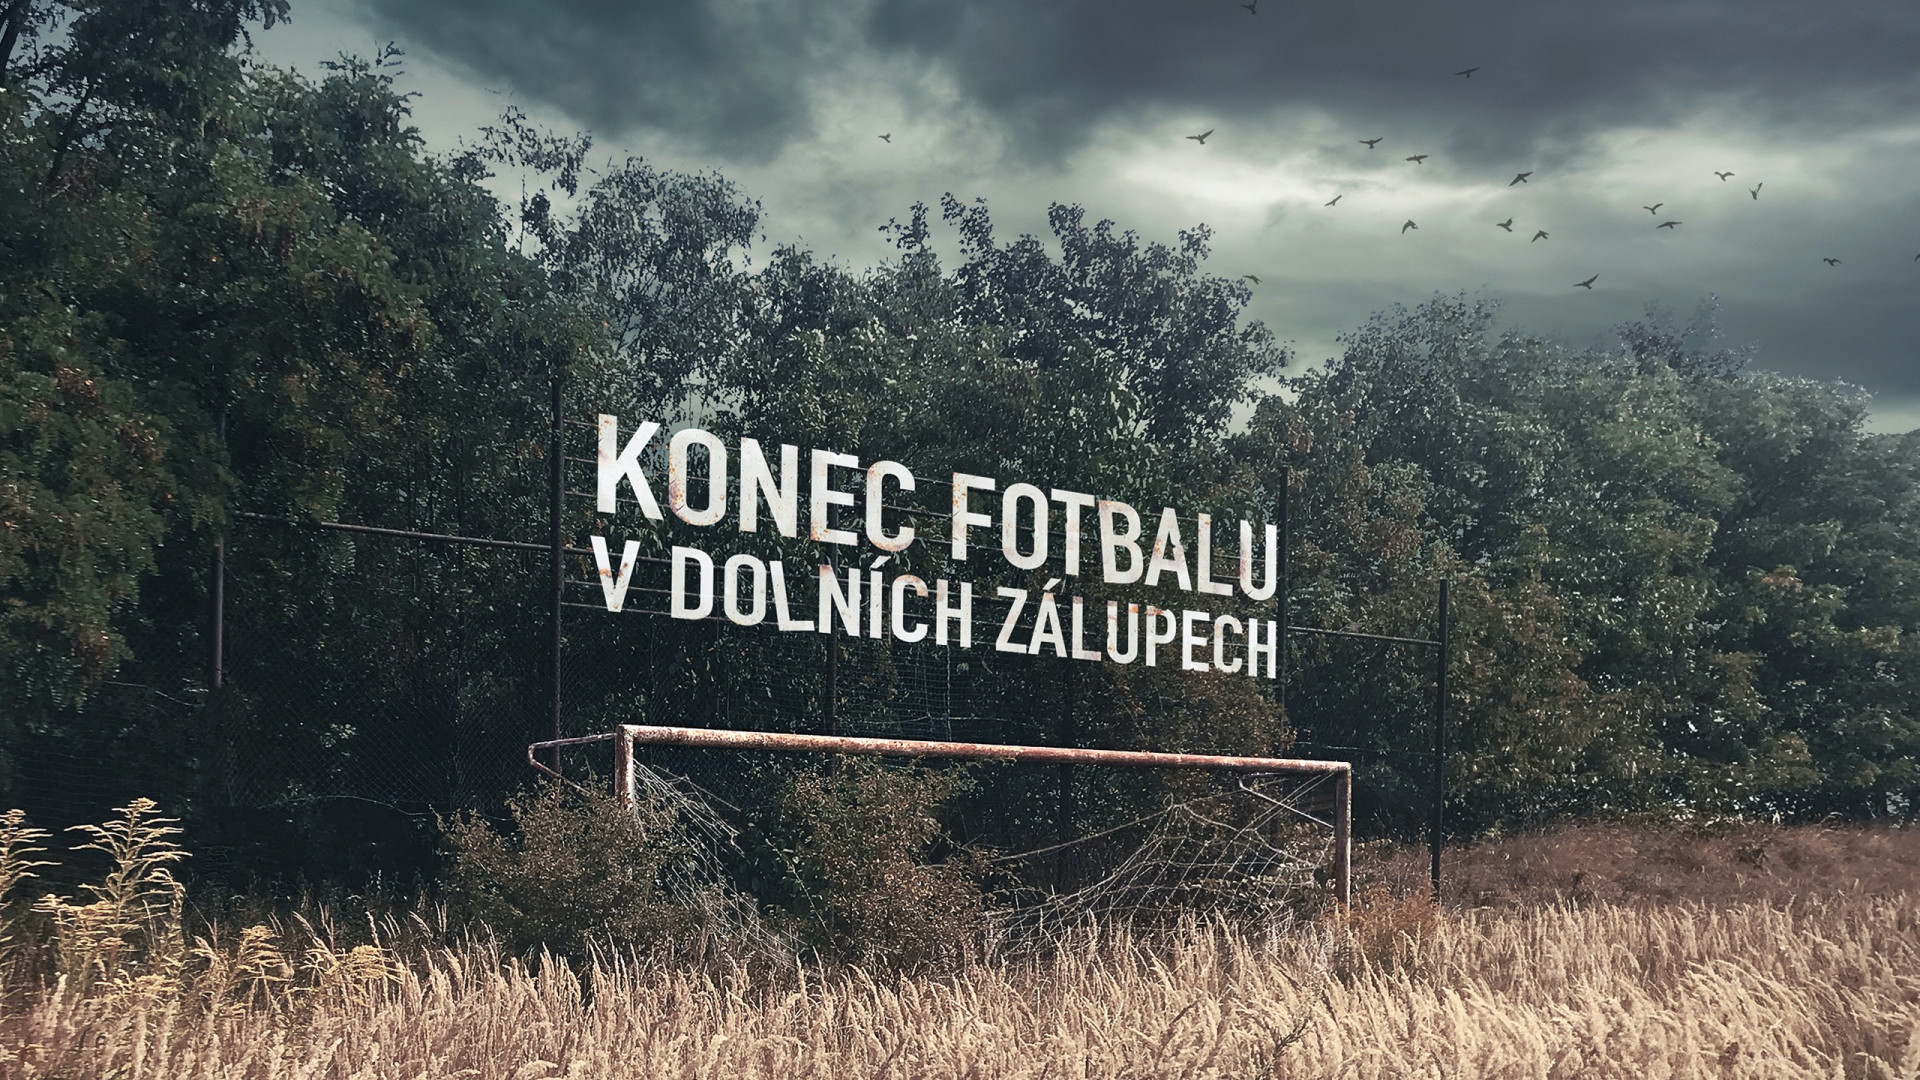 Czech amateur football was slowly dying and Gambrinus refused just to watch it go.